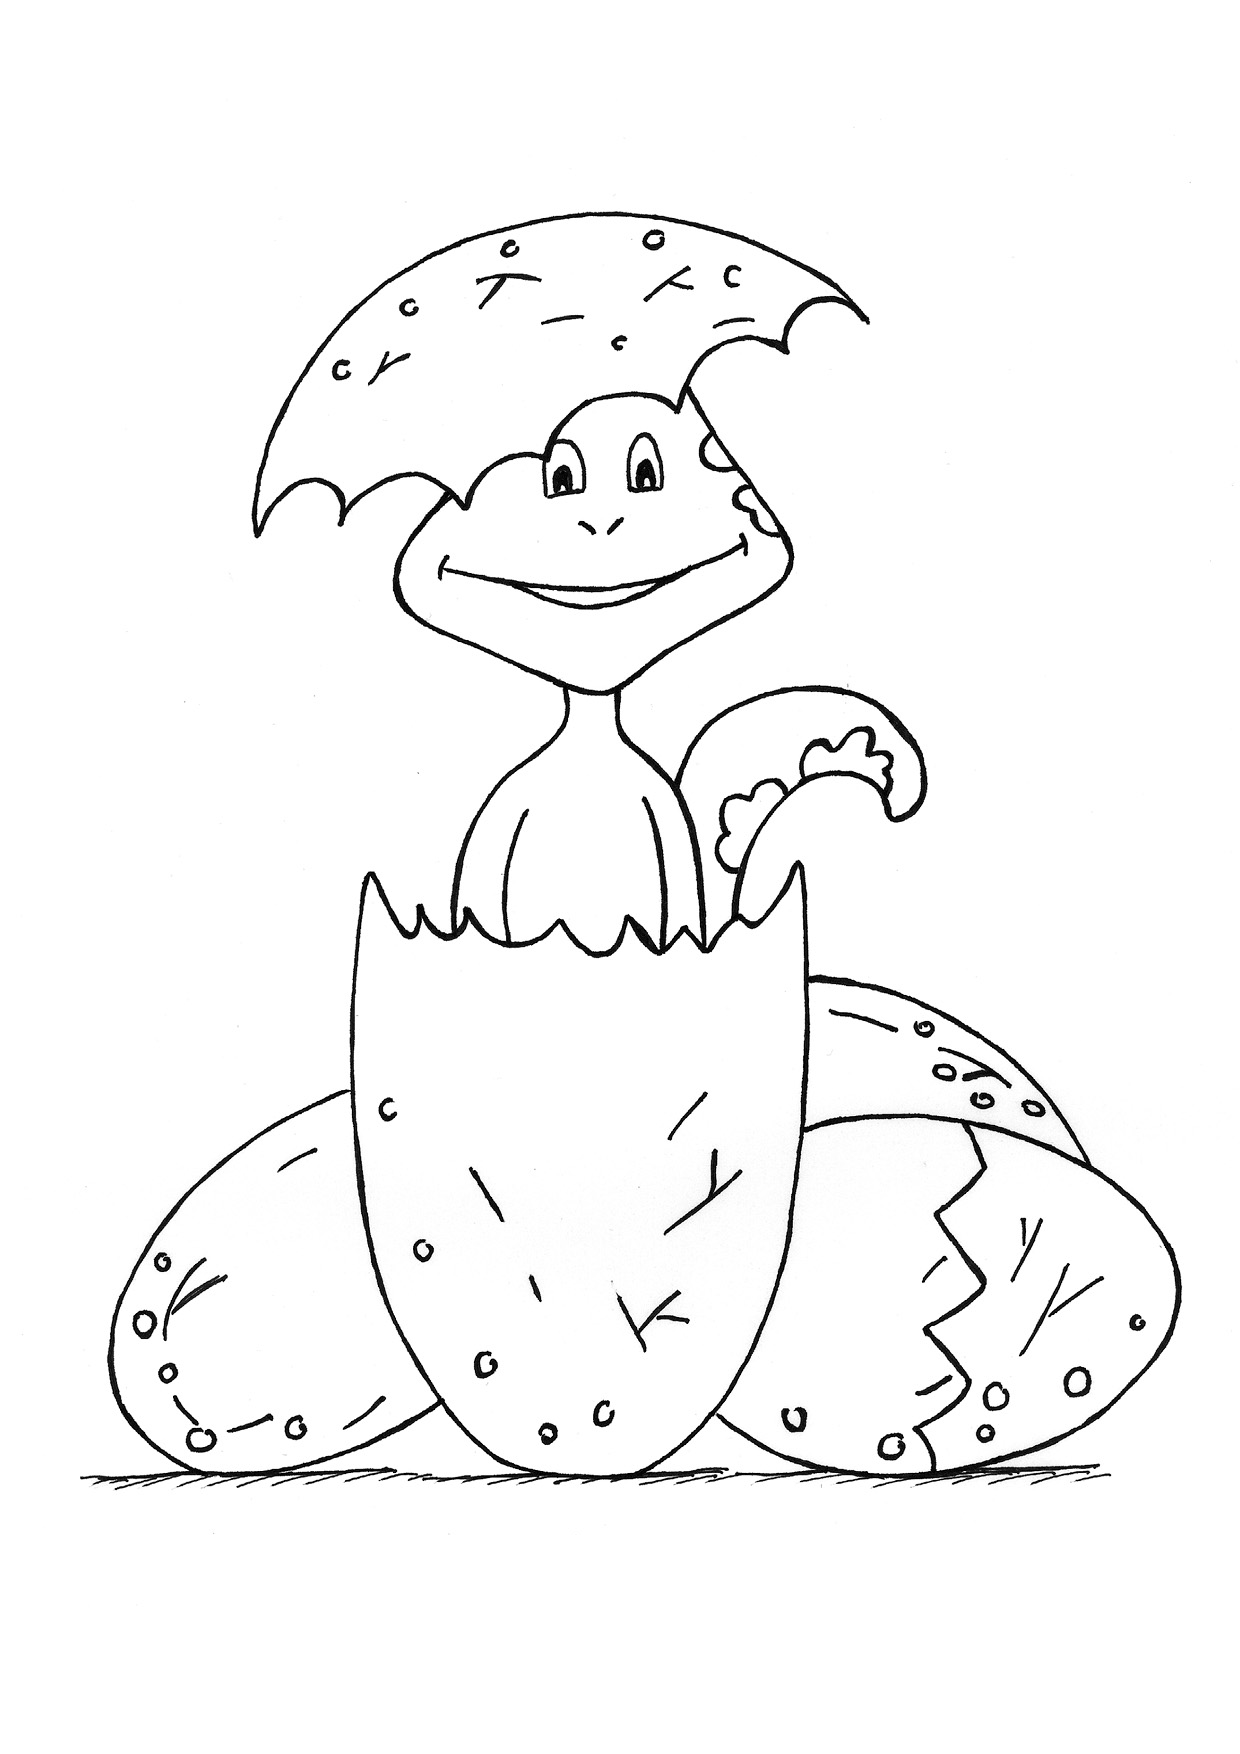 Download Cute Dinosaur Coloring Pages - Coloring Home